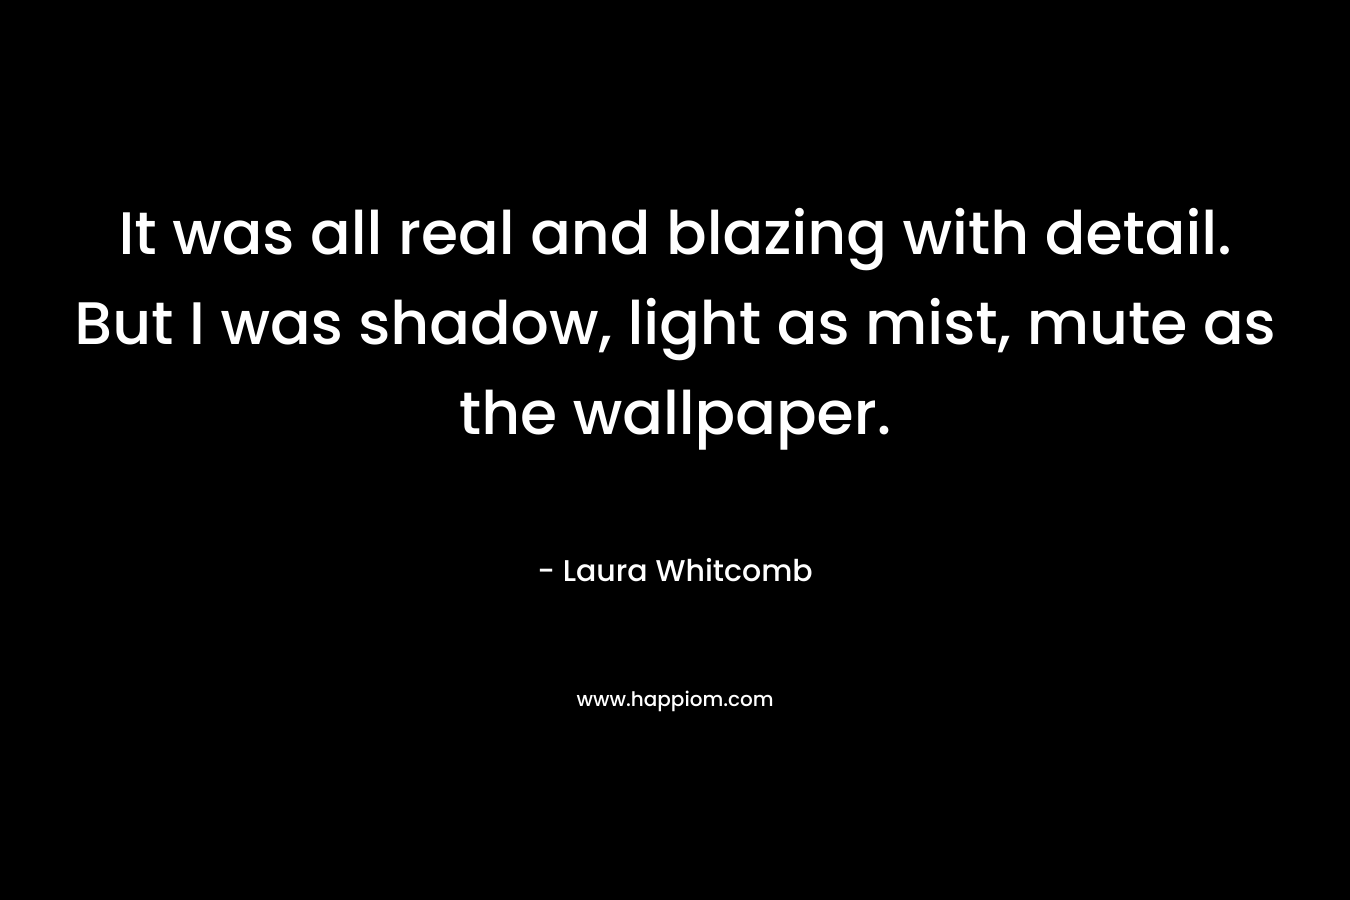 It was all real and blazing with detail. But I was shadow, light as mist, mute as the wallpaper.